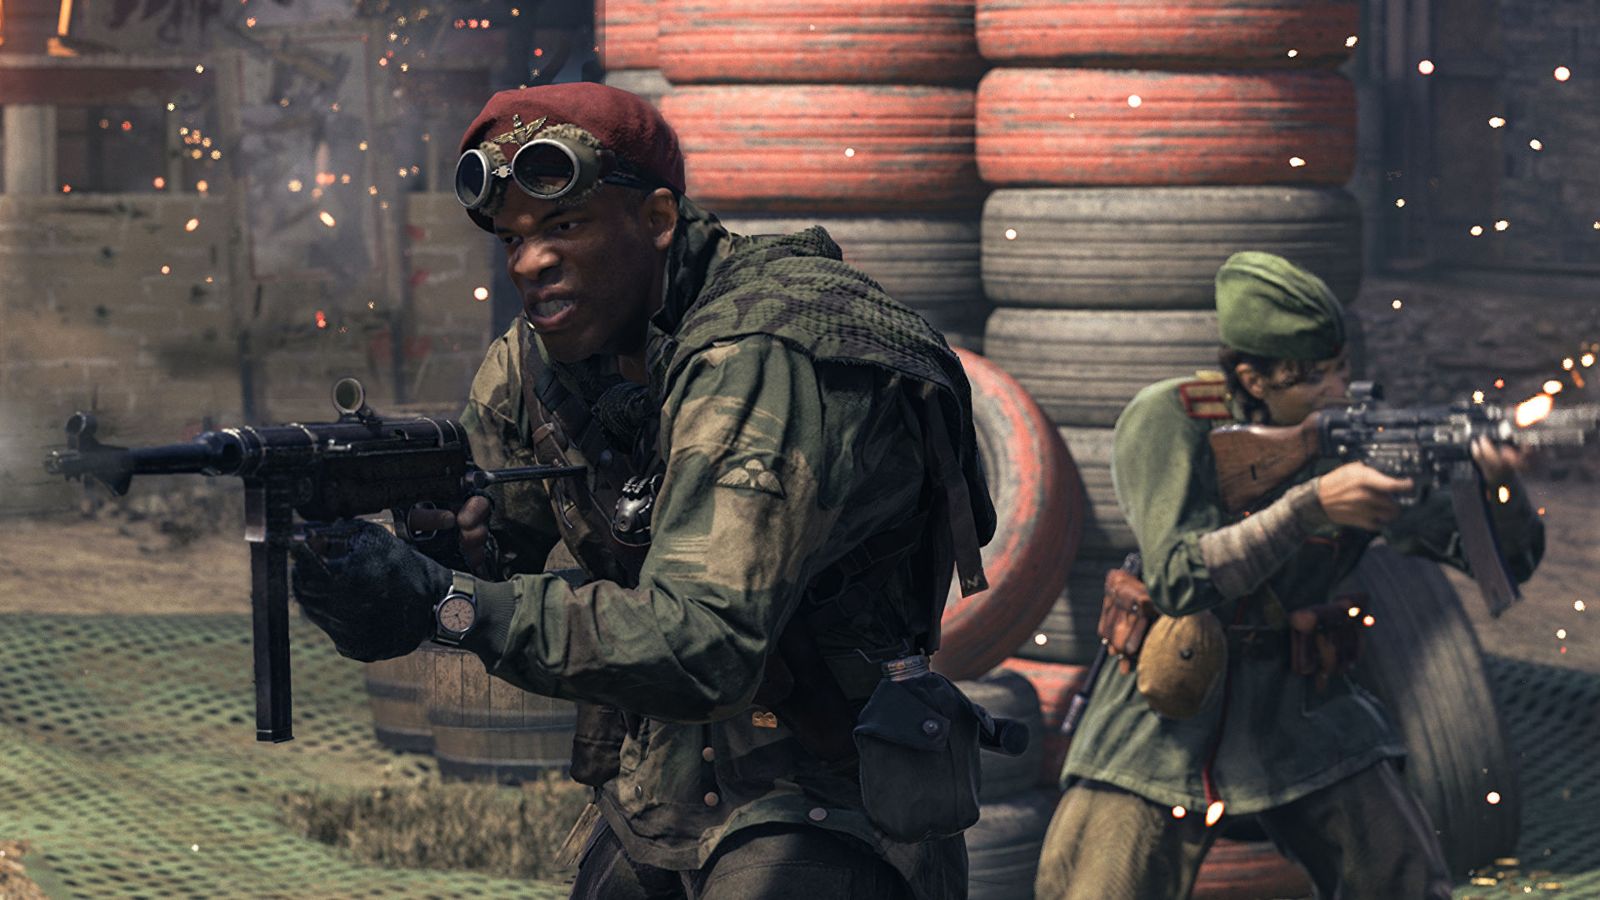 Image showing to Vanguard players holding an SMG